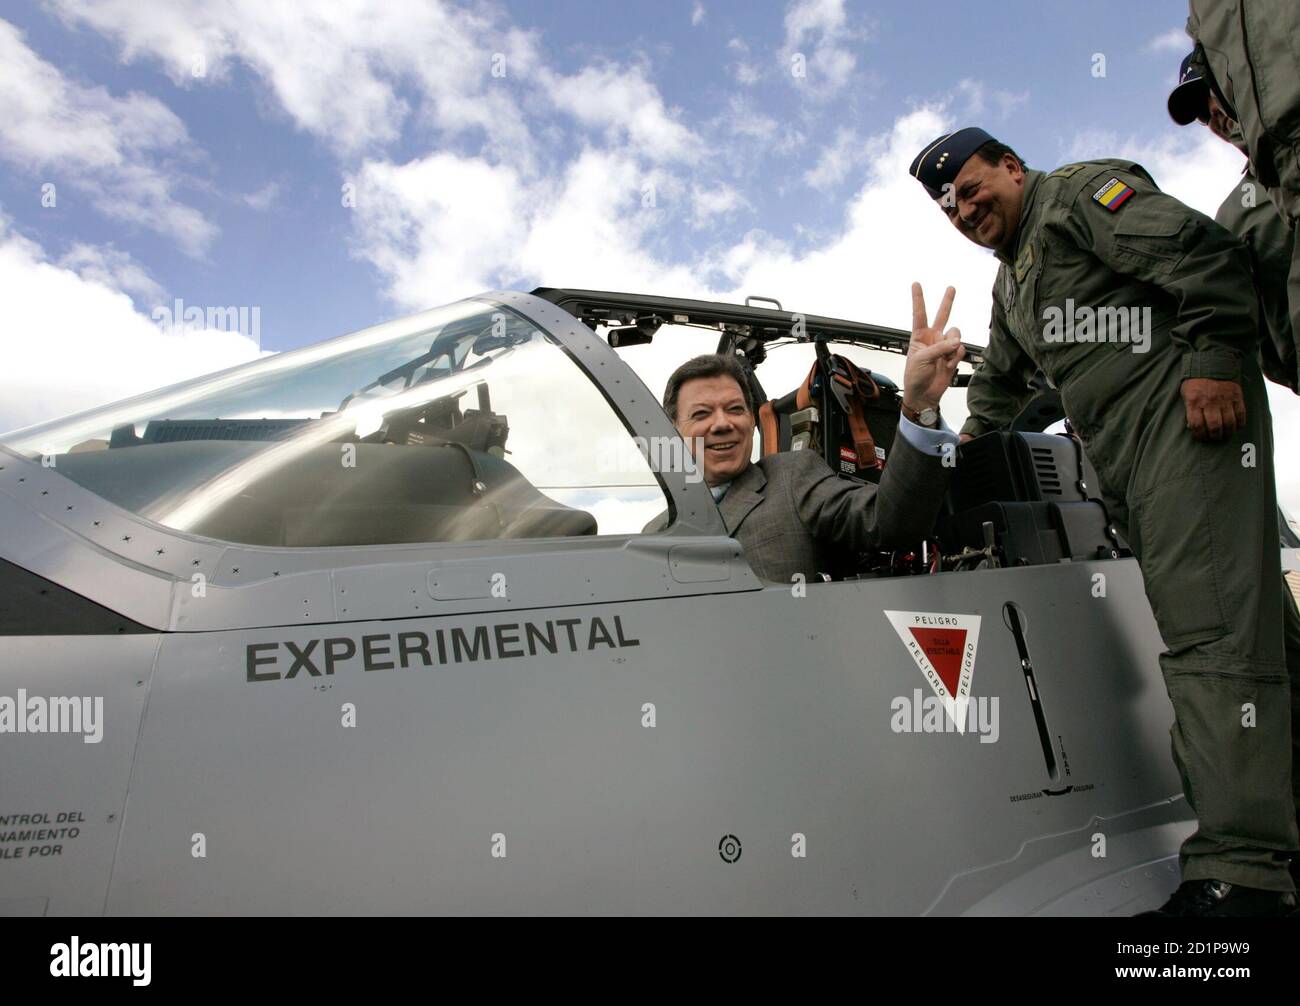 Colombia's Defense Minister Juan Manuel Santos gestures from a Tucano turboprop plane at Bogota's military airport of Catam in Bogota, December 14, 2006. Brazil delivered three military planes in Colombia in a move that Colombia's biggest rebel group characterized as meddling in its four-decade fight to establish a socialist state. The Super Tucano turboprop planes, made by Embraer, are part of a bigger order of 25 aircraft worth $235 million.  REUTERS/Jose Miguel Gomez         (COLOMBIA) Stock Photo